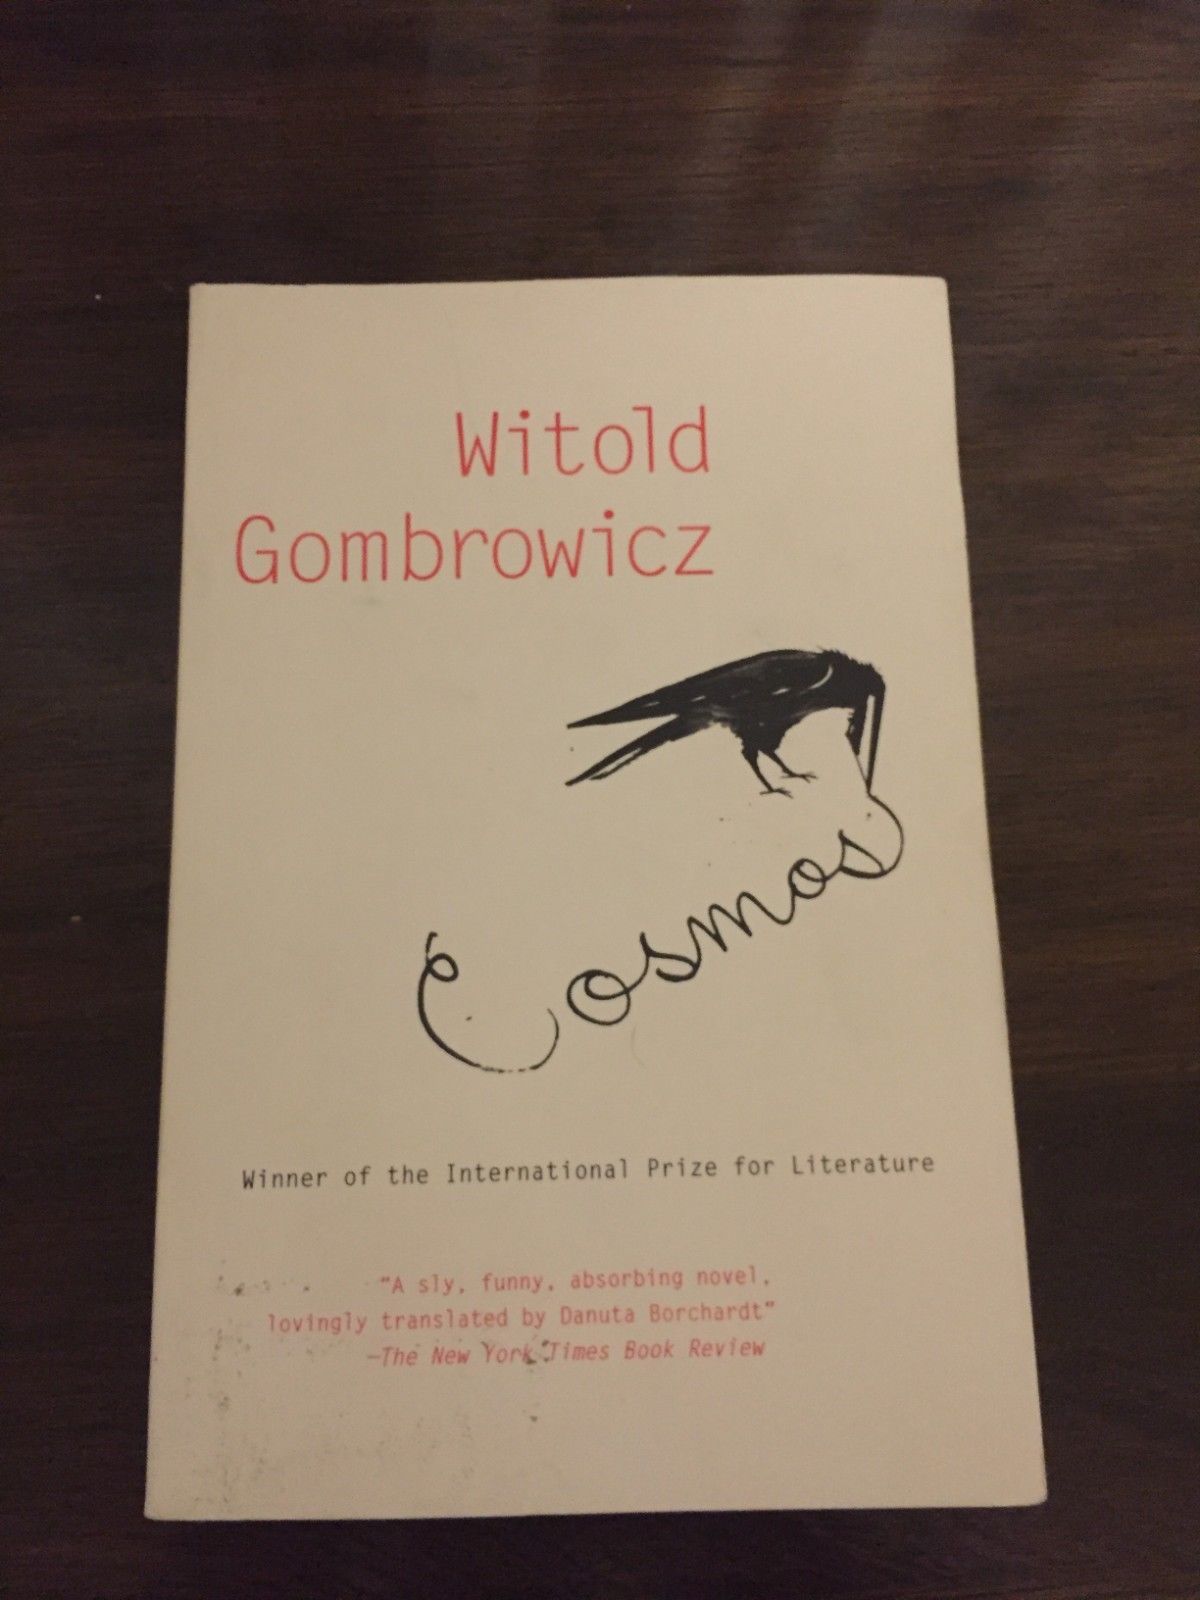 Cosmos Witold Gombrowicz Epub File